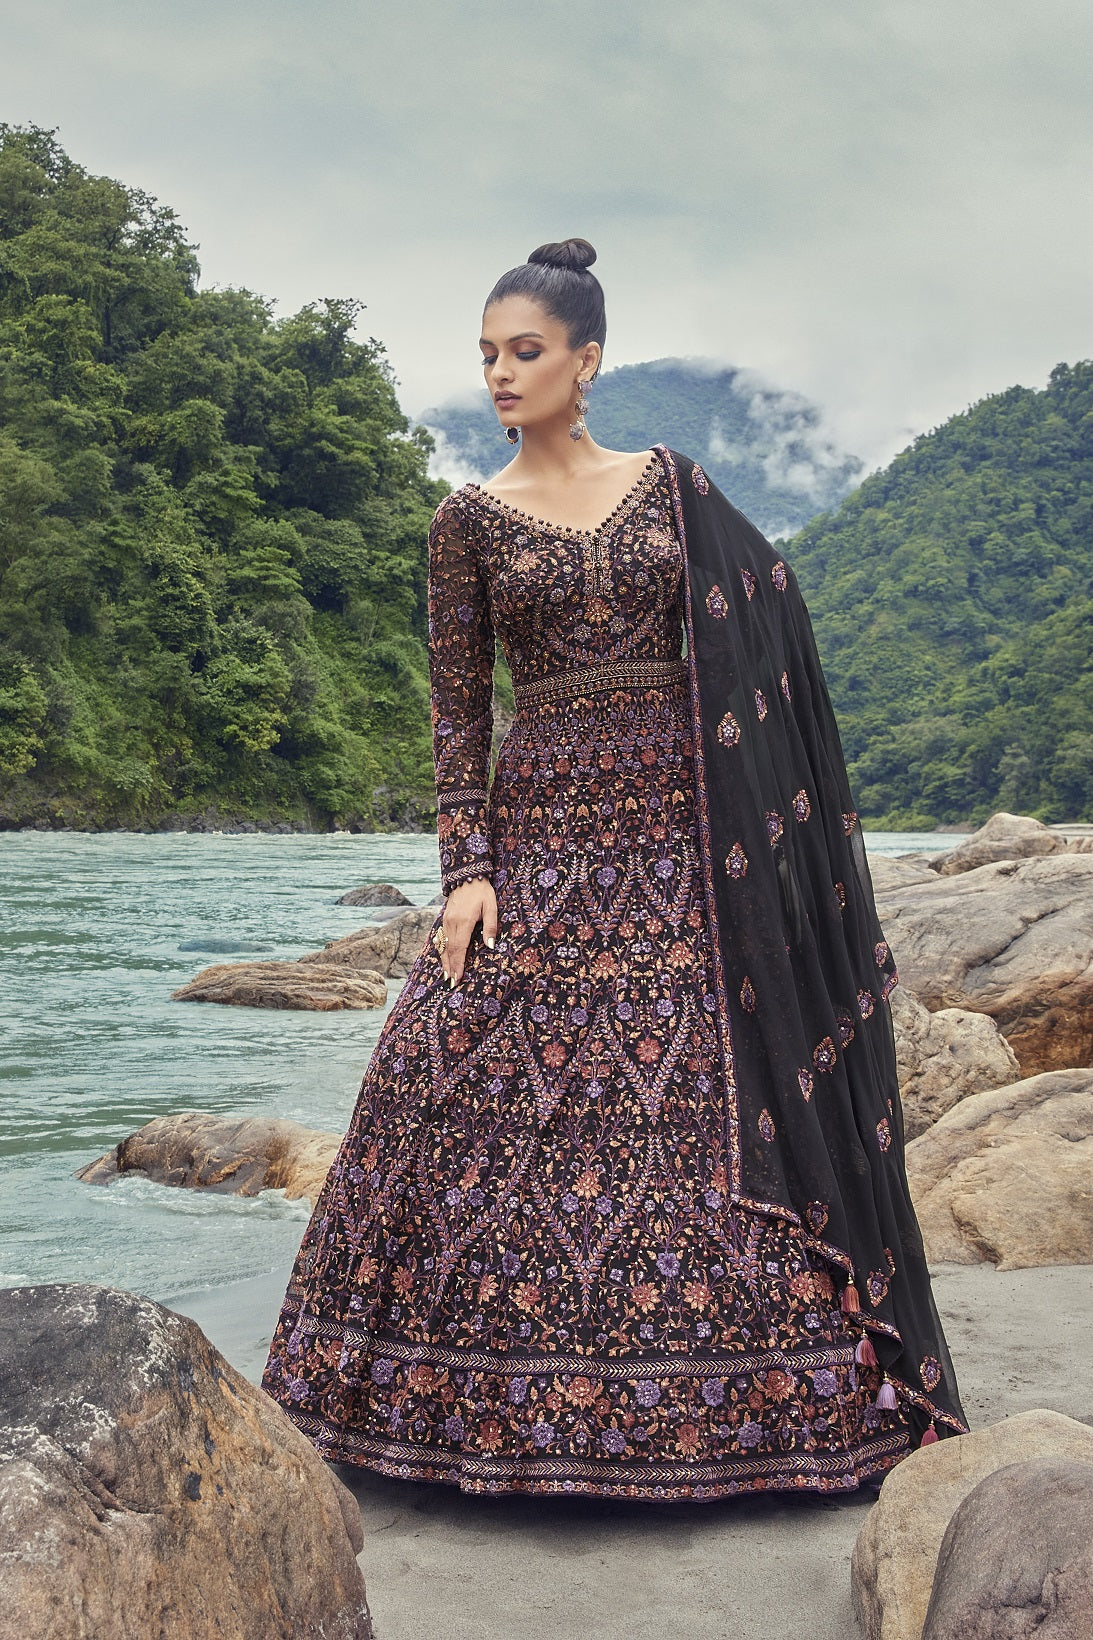 Shop by the Be the cynosure of all eyes as you flaunt this set of black gowns with a dupatta from Pure Elegance. Complete the look by wearing statement jewelry and heels.  Buy the look from Pure Elegance Indian clothing store in the USA online now.